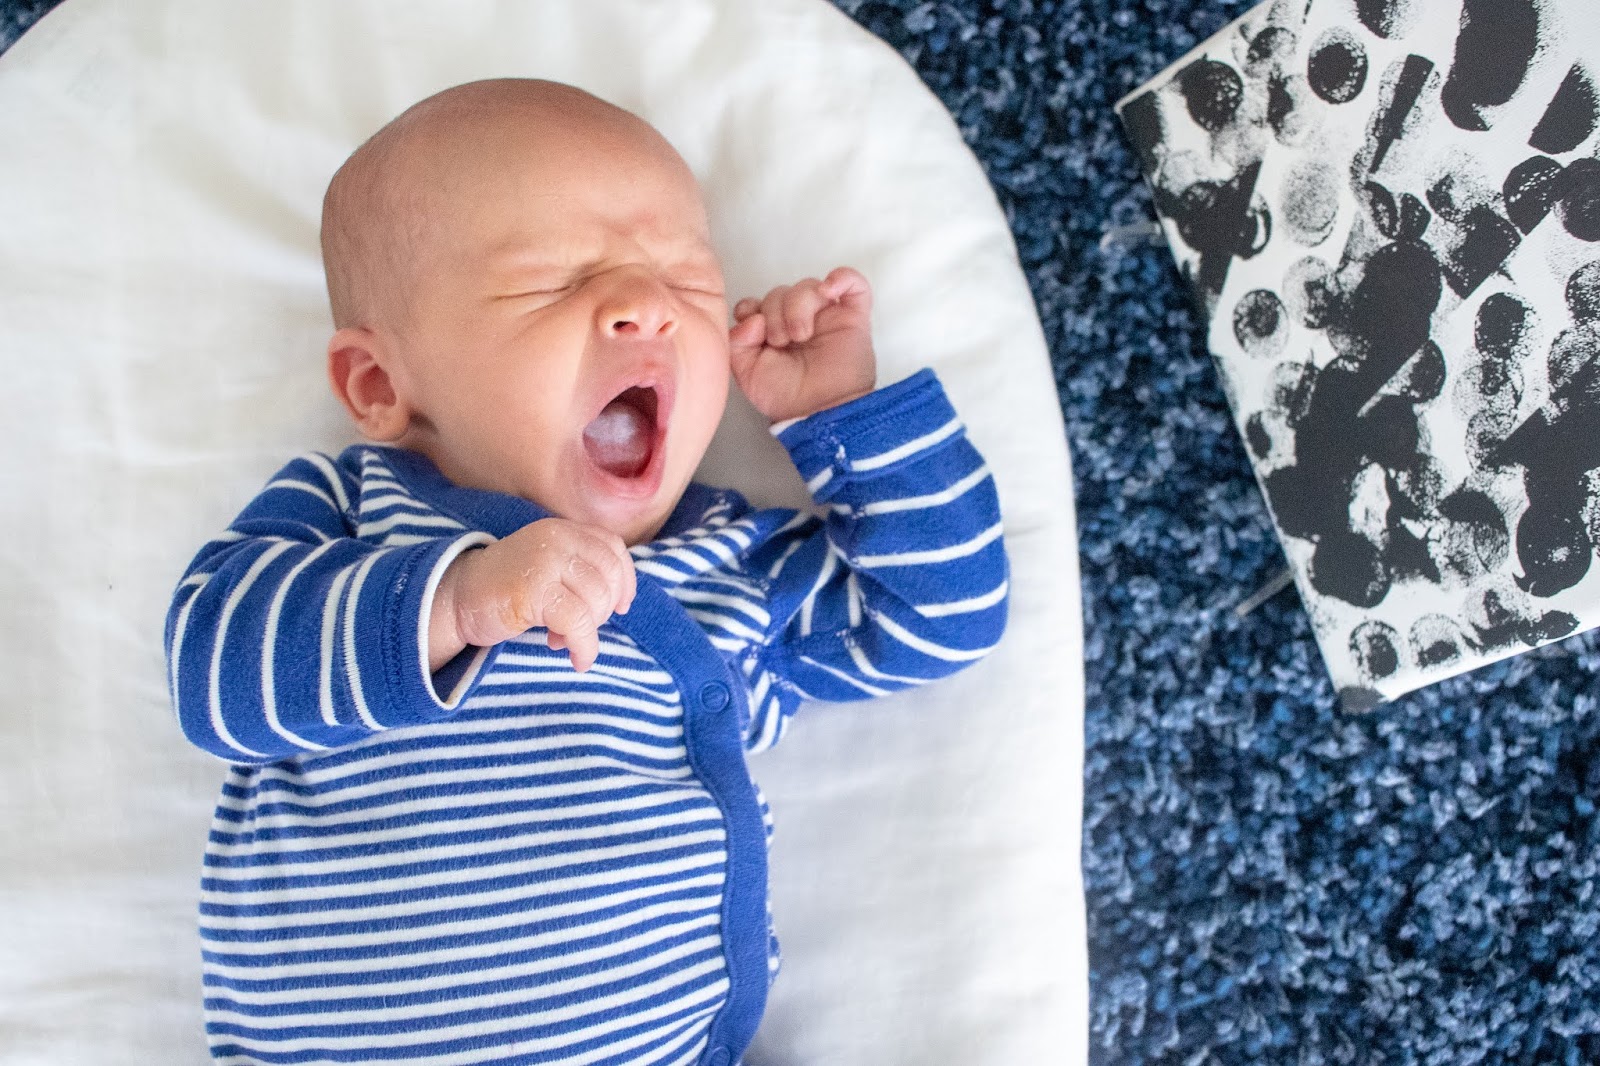 Using respectful communication with your newborn - why it's important and practical tips to make it happen